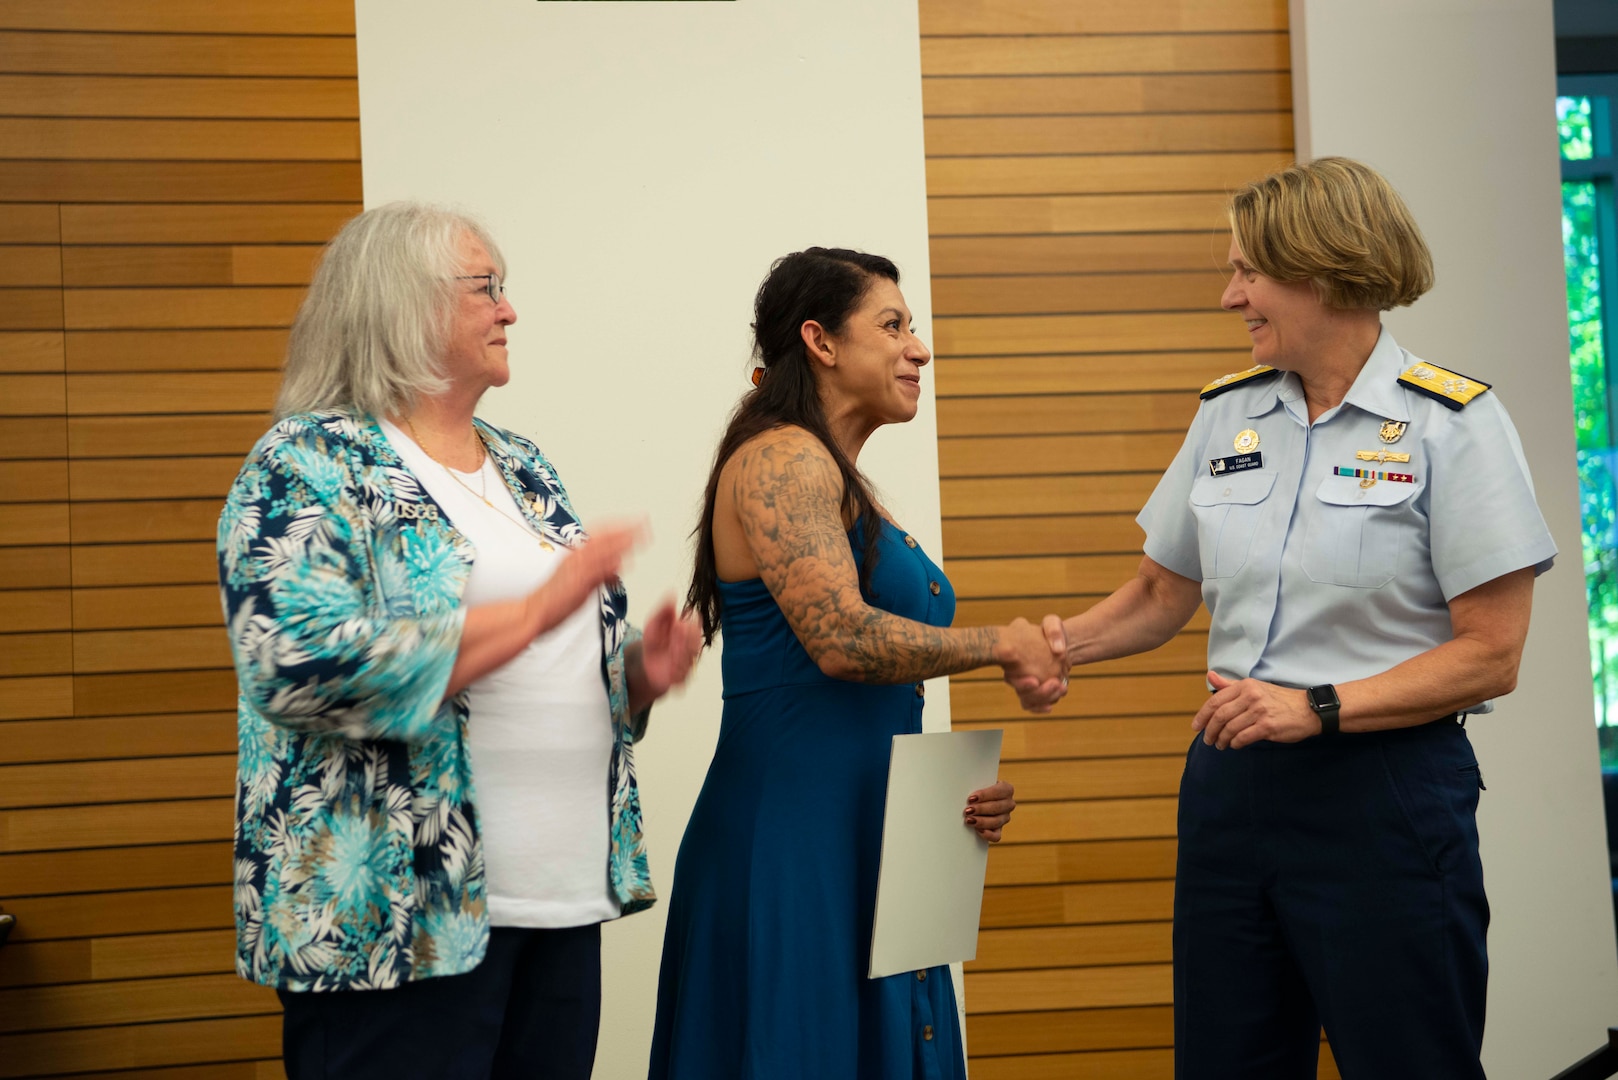 U.S. Coast Guard spouse Ivonne Ontiveros-Lopez (middle) receives the 2021 Wanda Allen-Yearout Ombudsman of the Year award, presented by Wanda Allen-Yearout, herself, (left) and Adm. Linda Fagan, Coast Guard commandant, (right) at the Senior Leadership Conference at Coast Guard Headquarters in Washington, D.C., June 2, 2022.
The Wanda Allen-Yearout OOY Award Program annually recognizes a unit ombudsman that has demonstrated the greatest commitment serving as a Coast Guard Ombudsman.
(U.S. Coast Guard photo by Petty Officer 2nd Class Ronald Hodges)